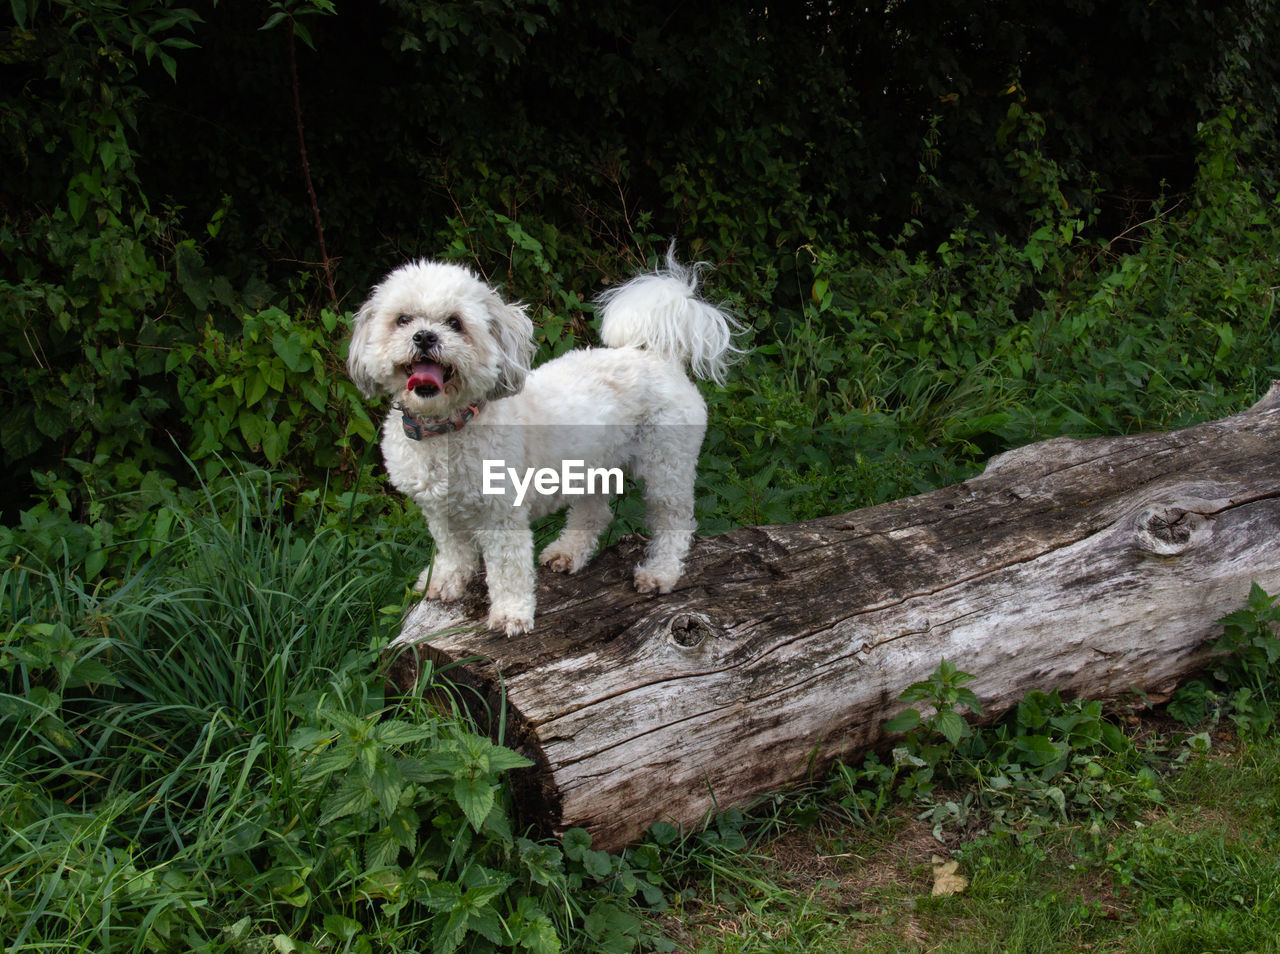 Dog standing on a tree trunk in the woods